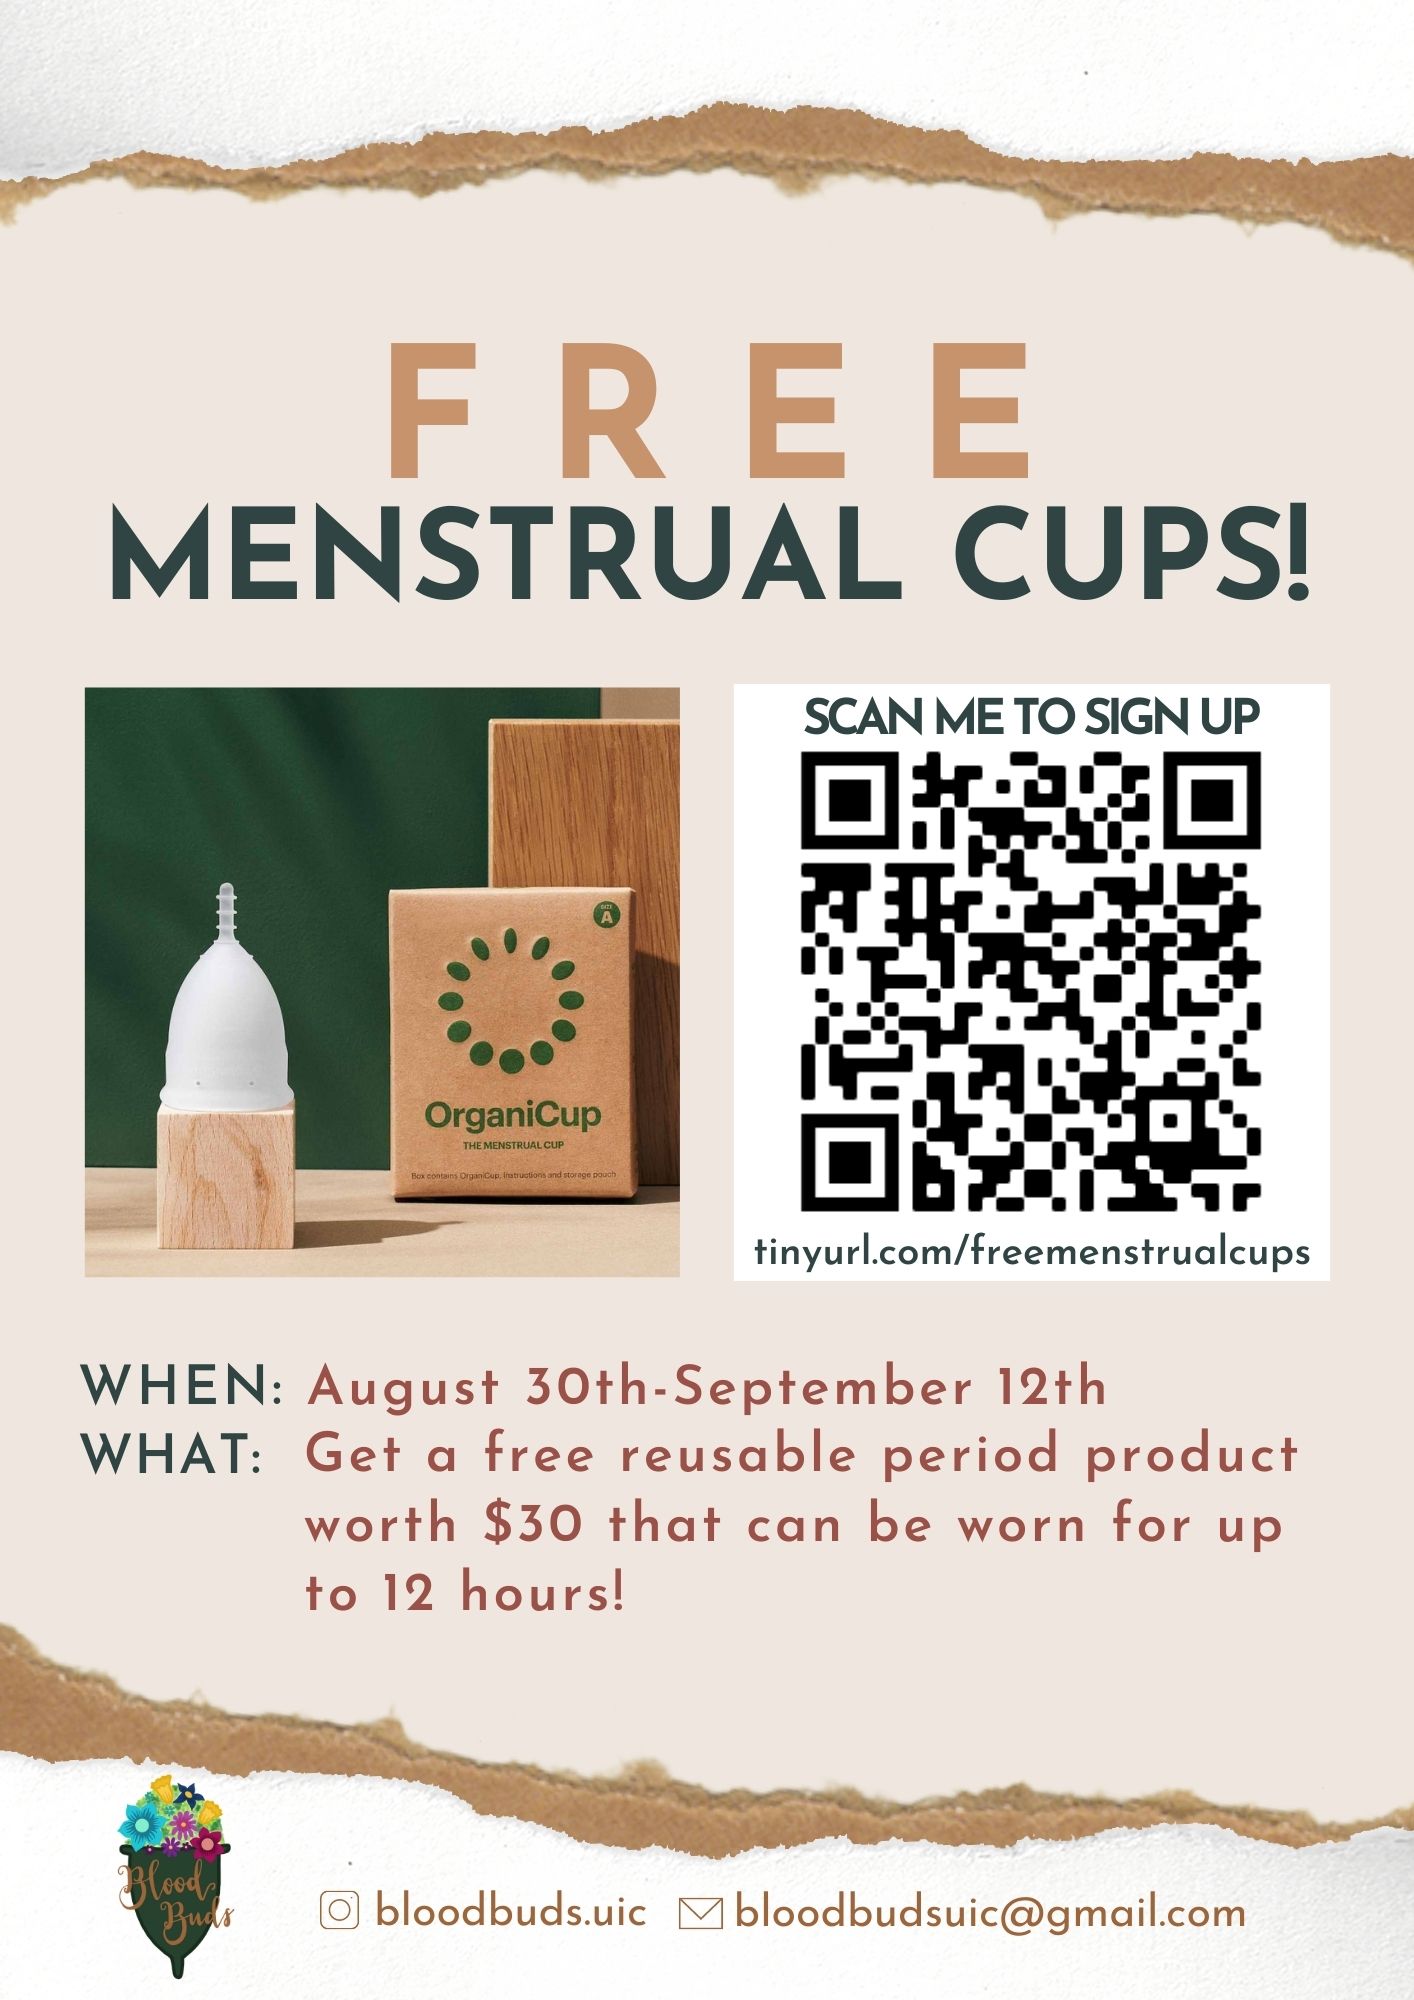 UIC Blood Buds - Get a free menstrual cup and help us donate 1000+